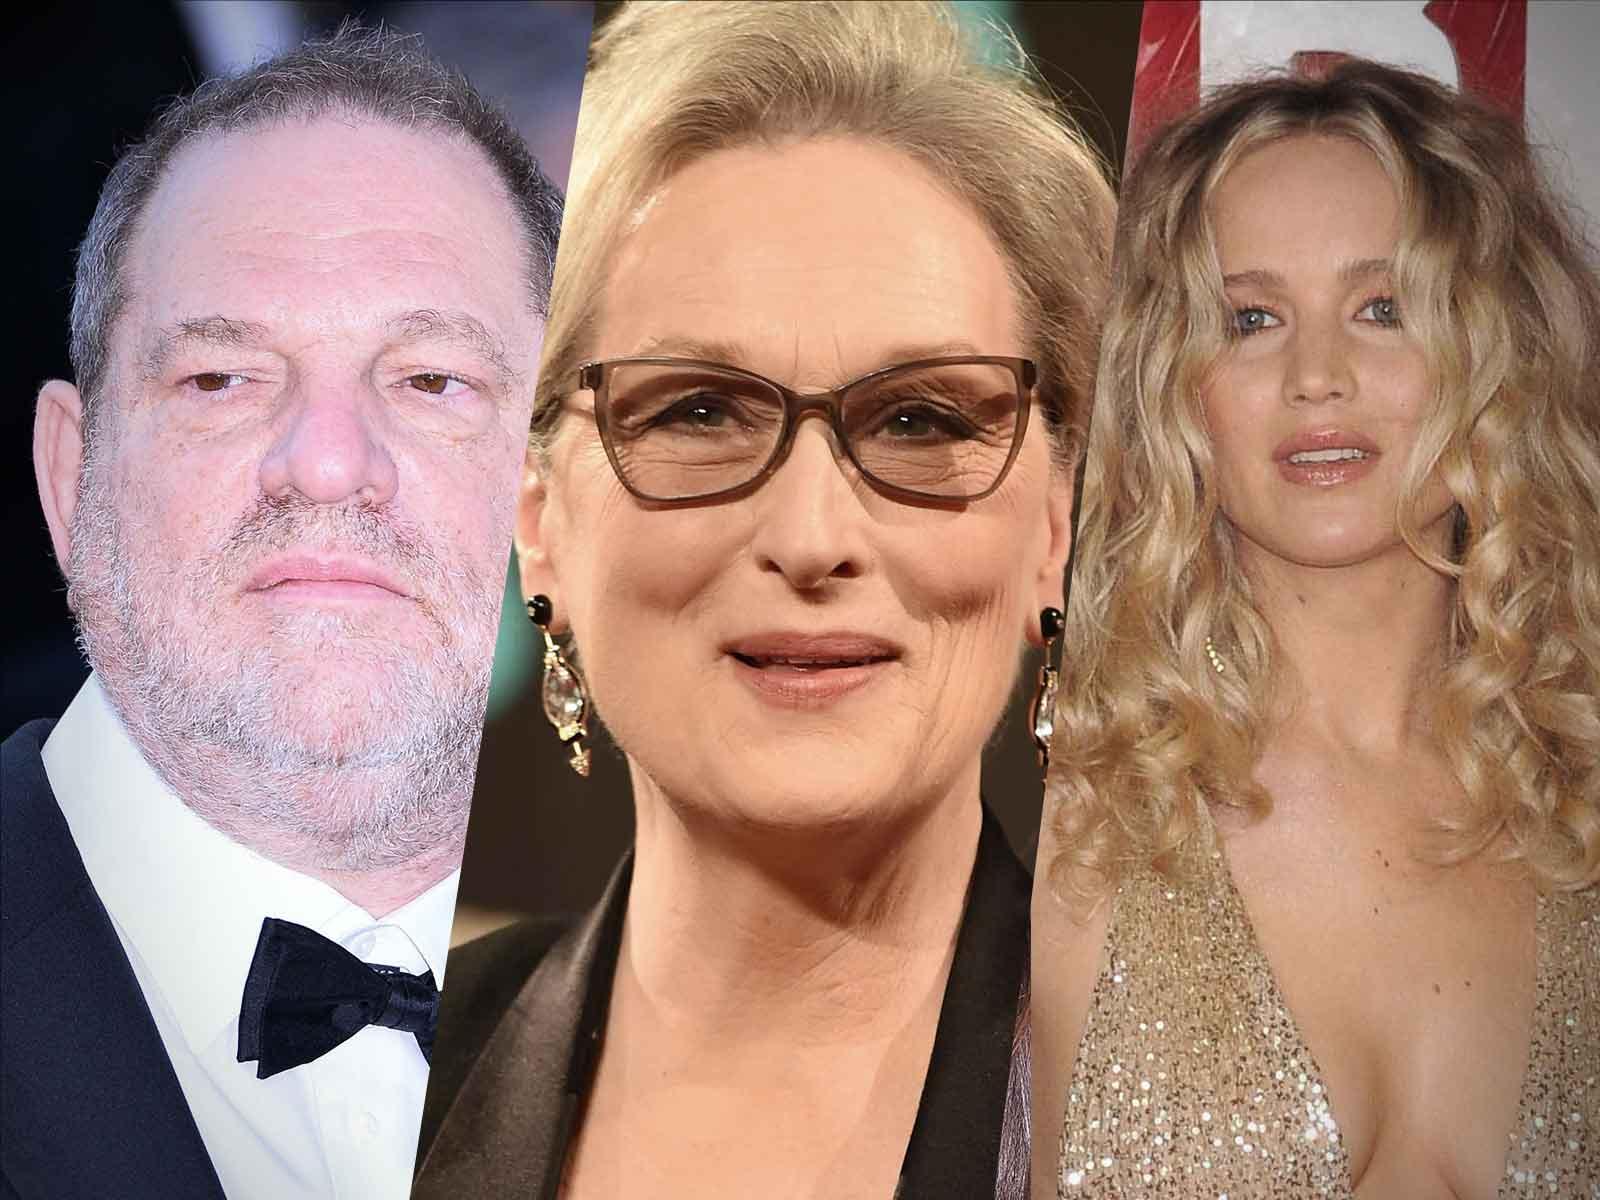 Harvey Weinstein Apologizes for Using Meryl Streep and Jennifer Lawrence as Part of Legal Defense